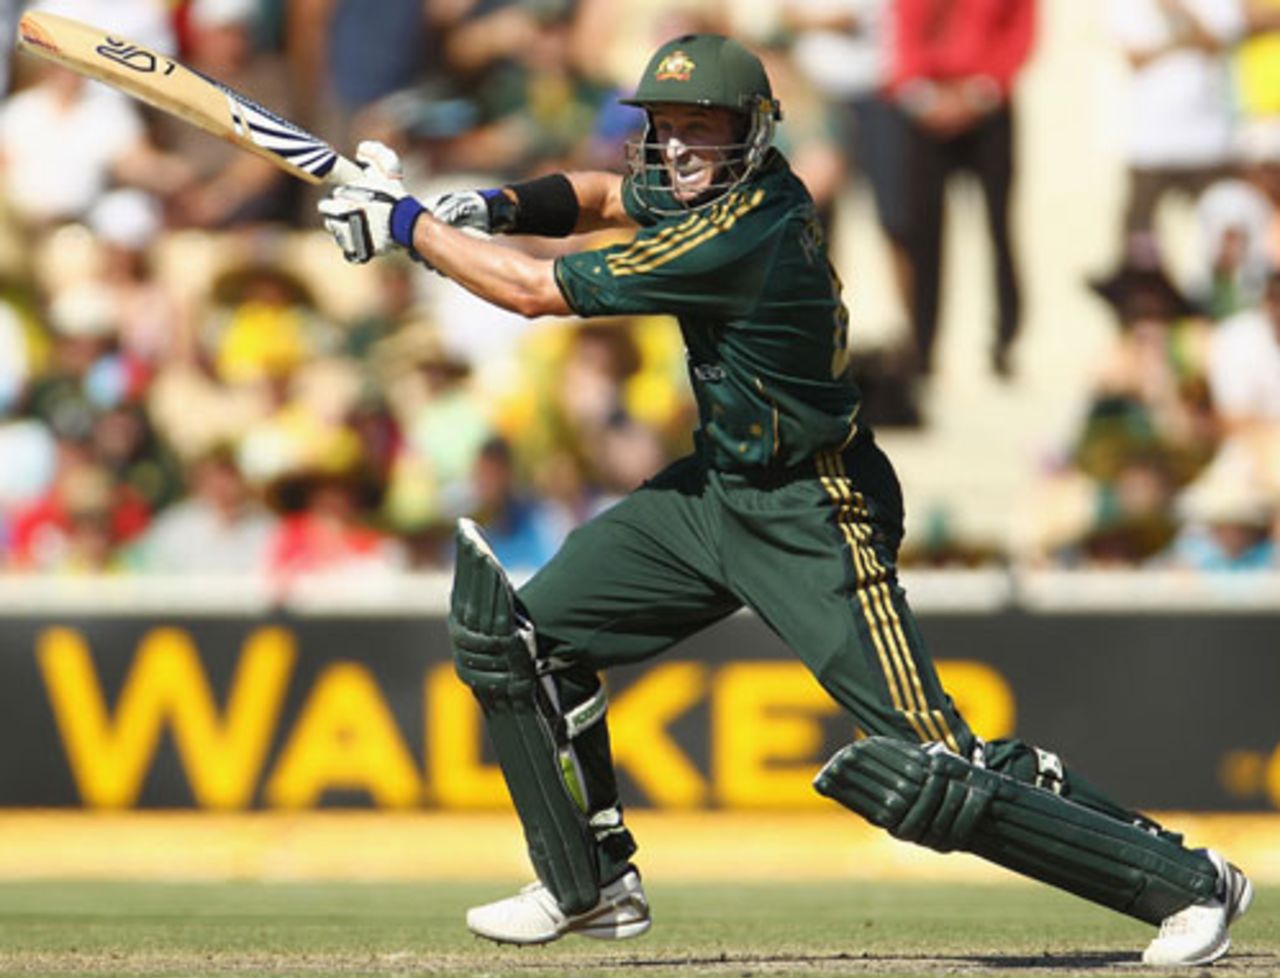 Michael Hussey charged to 49 in 28 balls, Australia v Pakistan, 3rd ODI, Adelaide, January 26, 2010